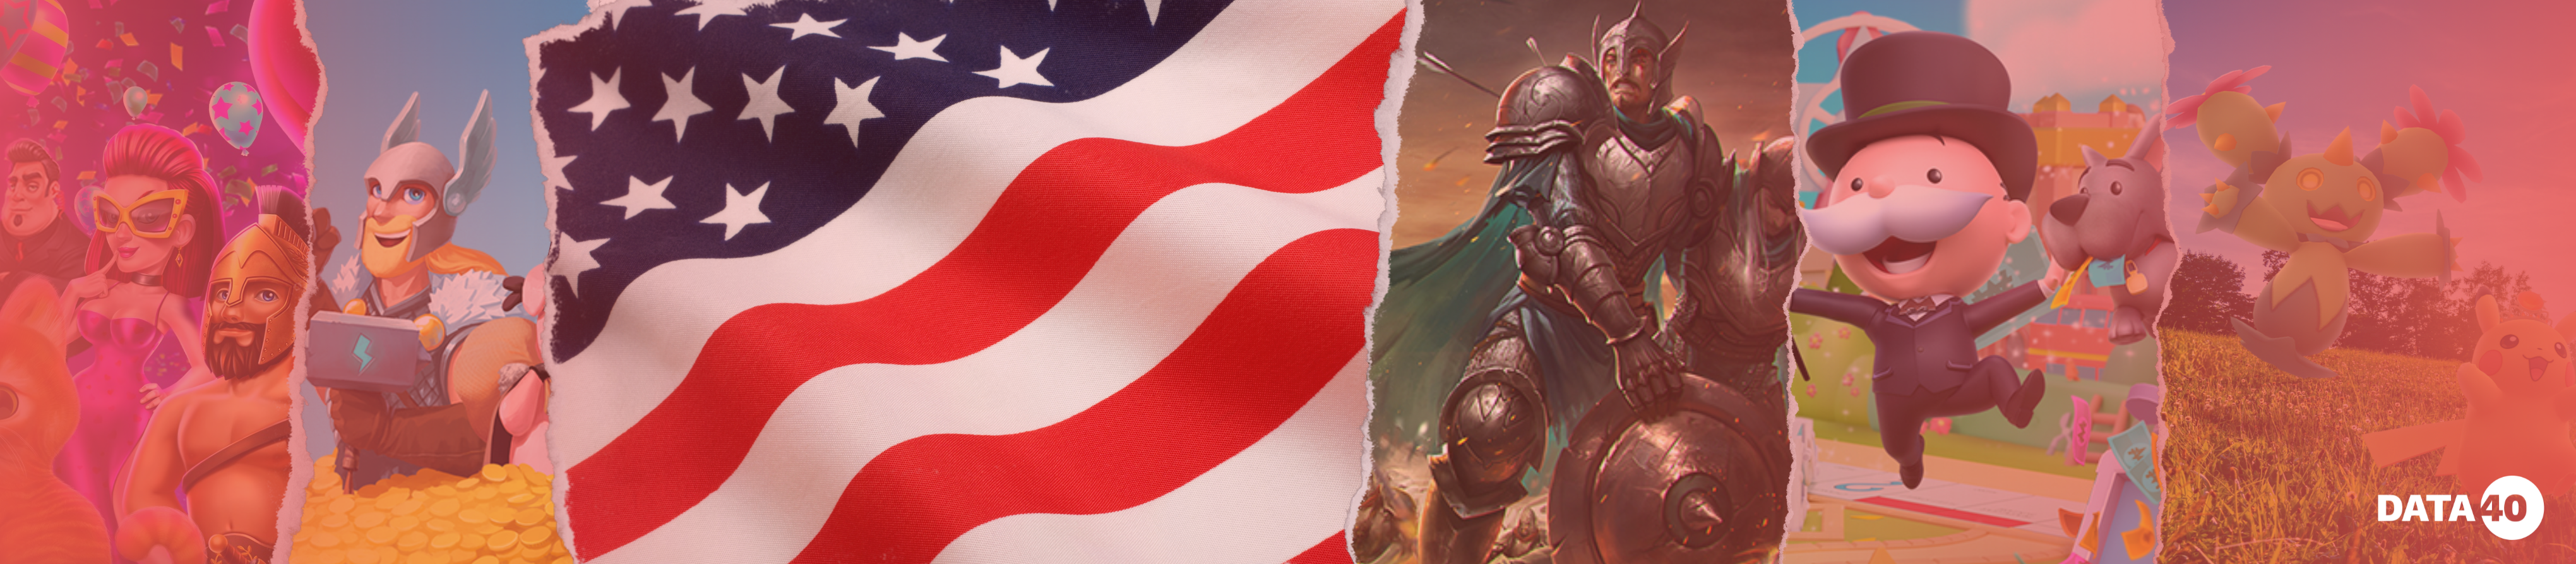 Top Grossing Mobile Games: The USA